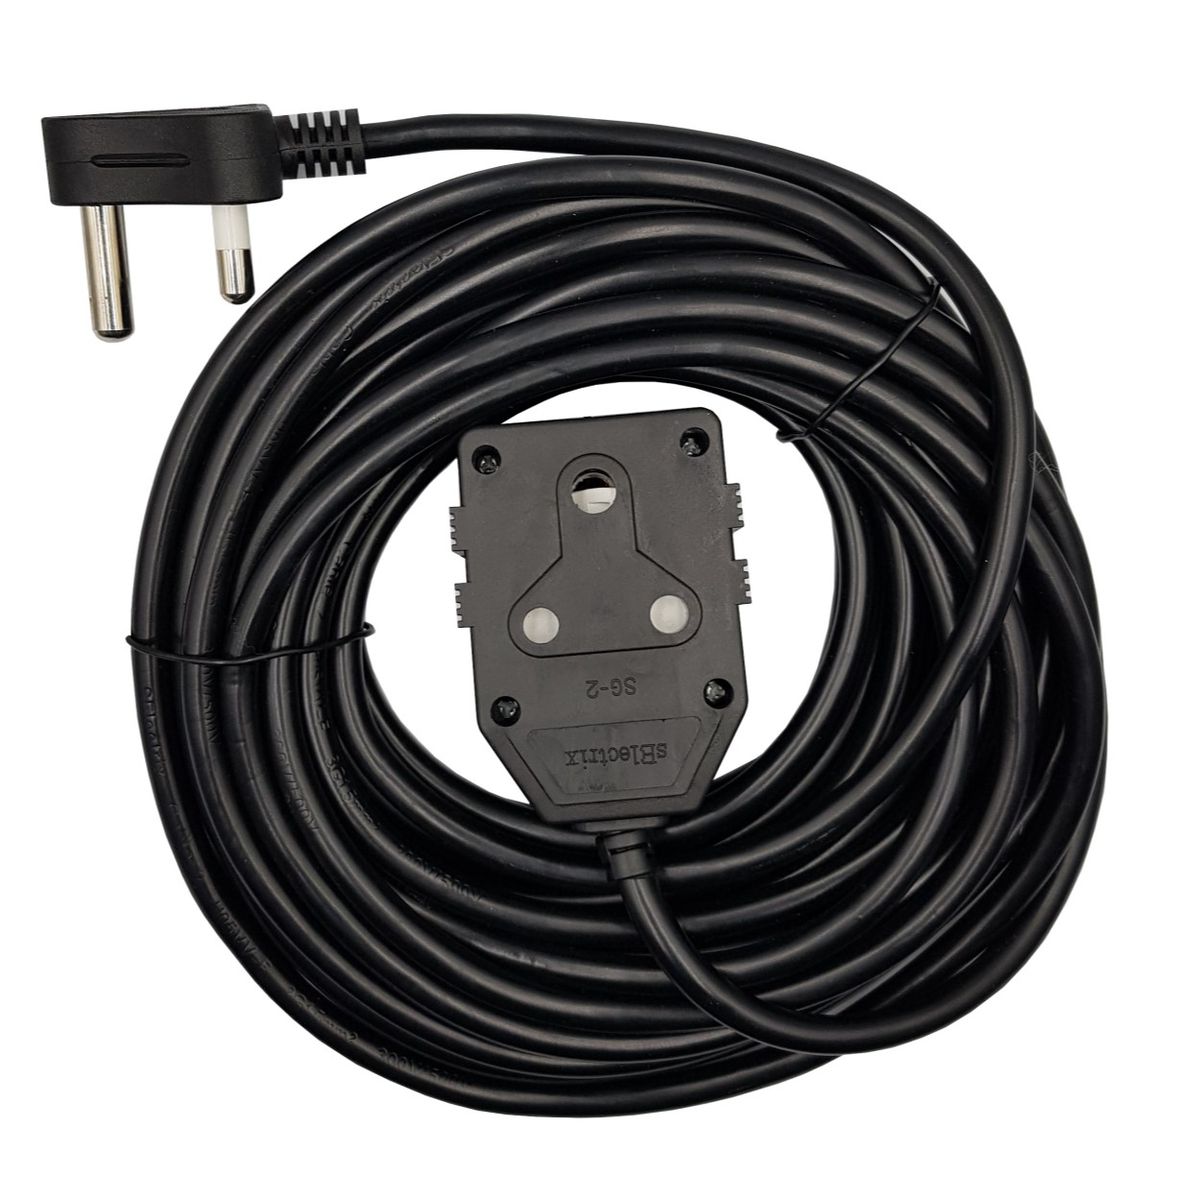 10m Black Heavy Duty 16A Extension Electrical Lead / Cable: Double Coupler